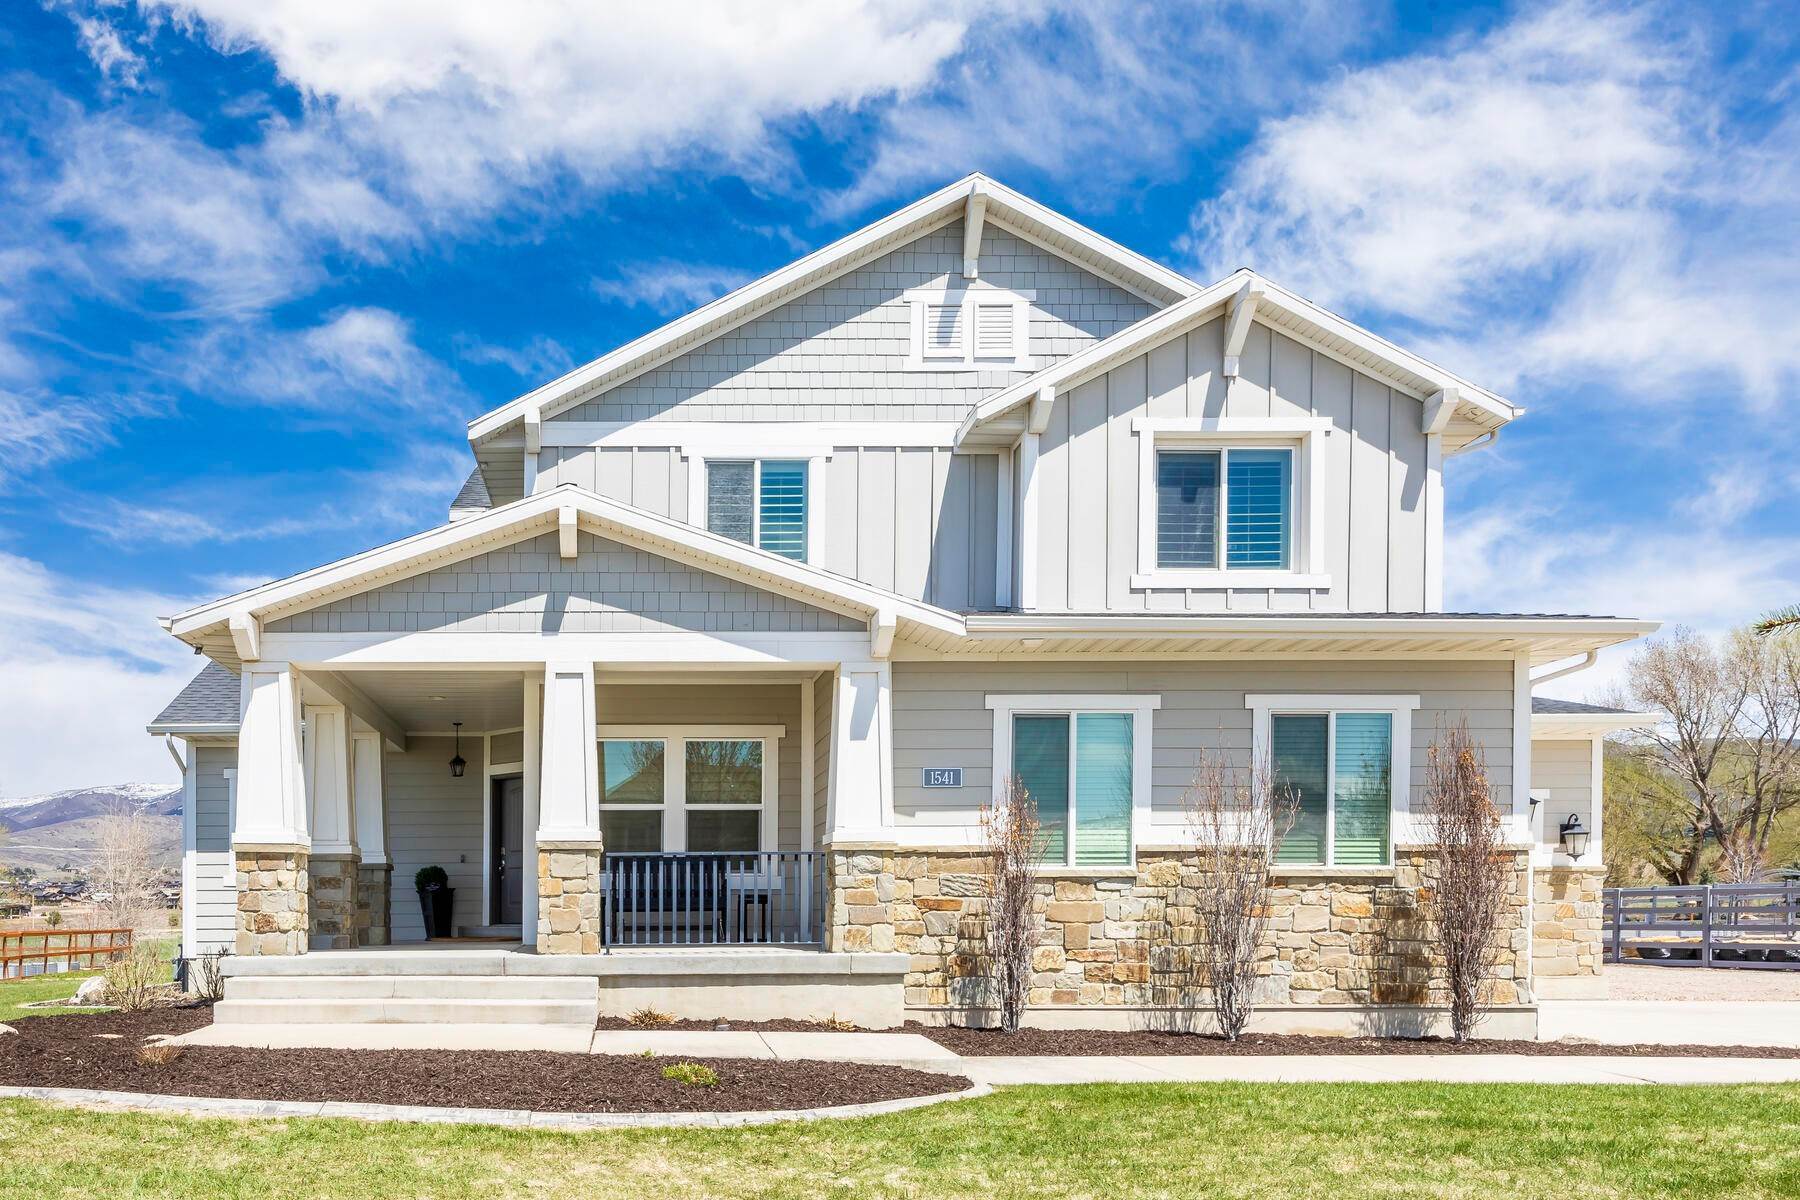 Single Family Homes for Sale at Beautiful Home in Desirable Triple Crown Neighborhood 1541 Preakness Lane Heber City, Utah 84032 United States